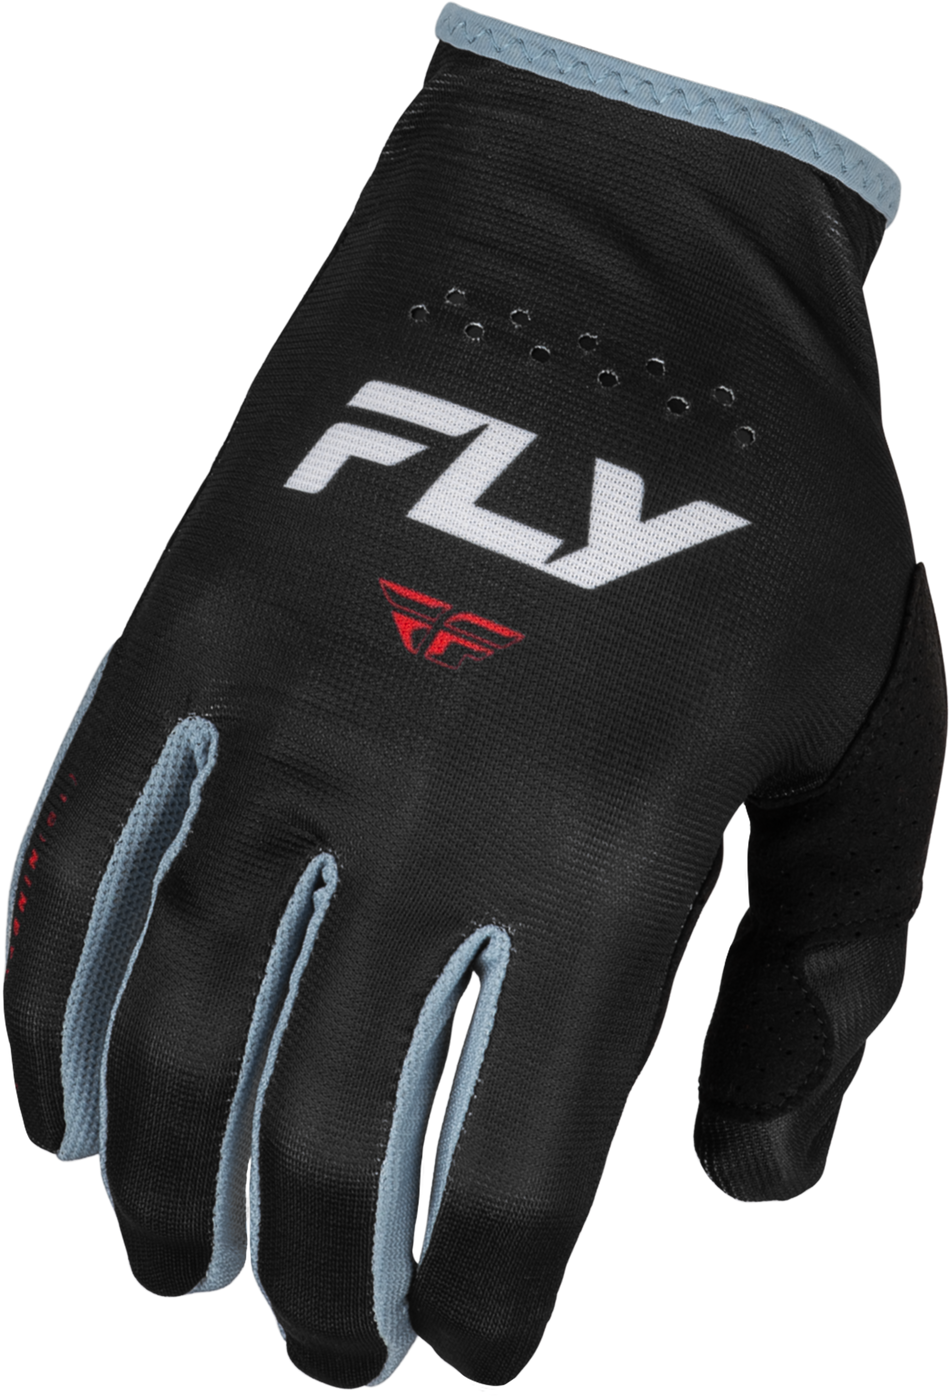 FLY RACING Lite Gloves Black/White/Red Xs 377-710XS